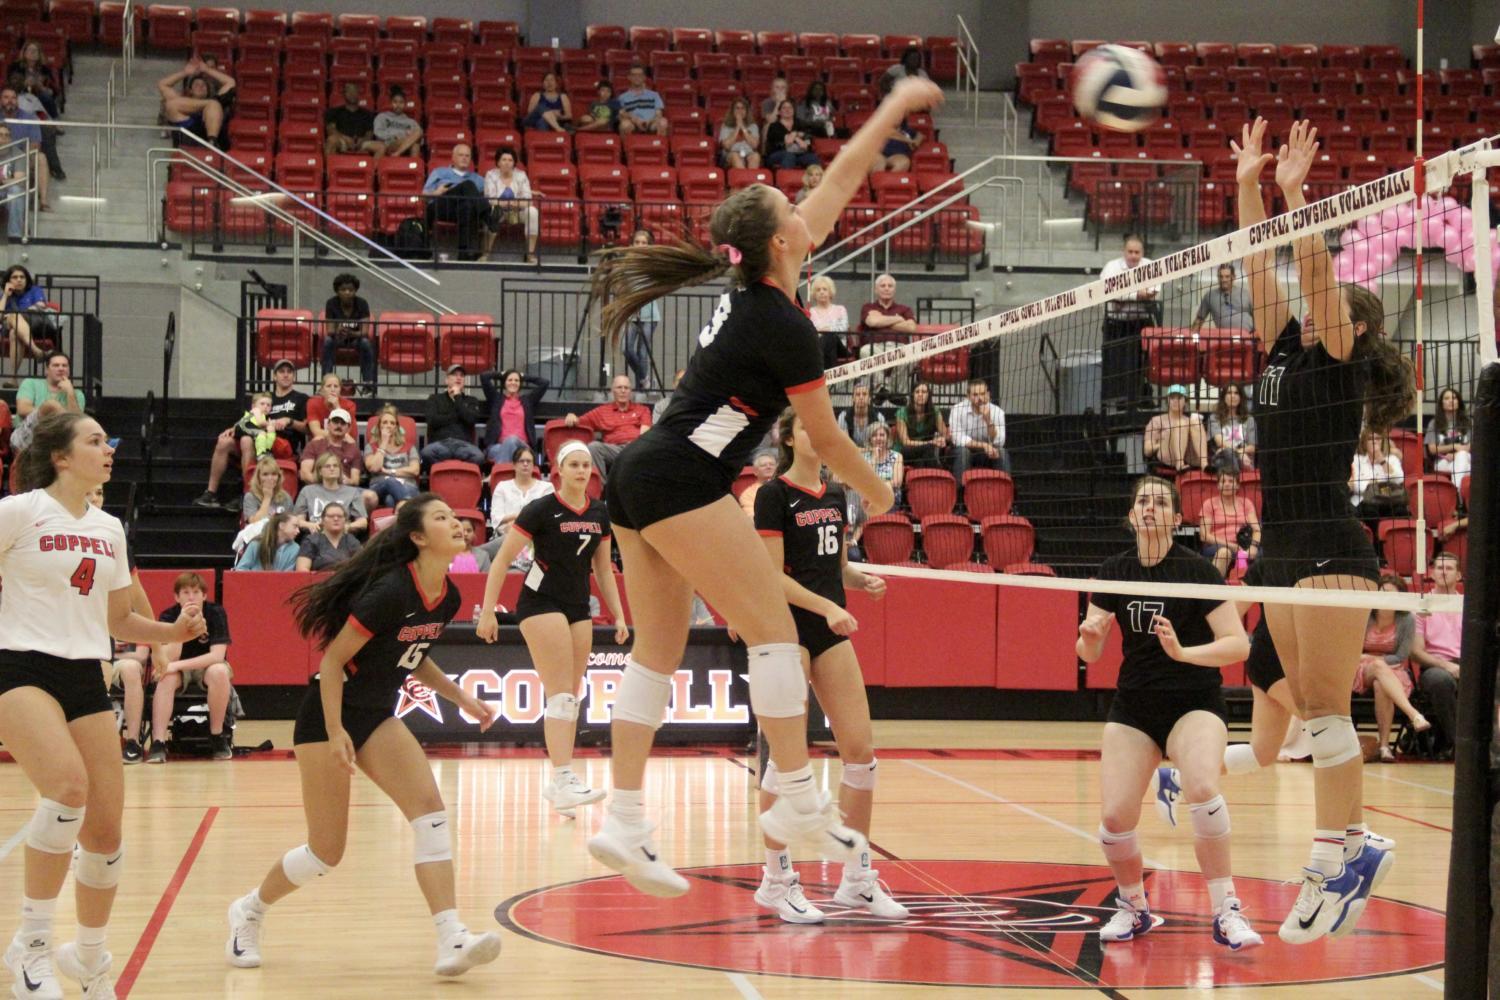 Coppell High School senior Breanne Chausse right front spikes the ball during the match at the Coppell High School Arena against Pearce on Tuesday night. The Cowgirls defeated the Lady Mustangs, 25-21, 25-23, 24-26, 25-14, in their first home district game.